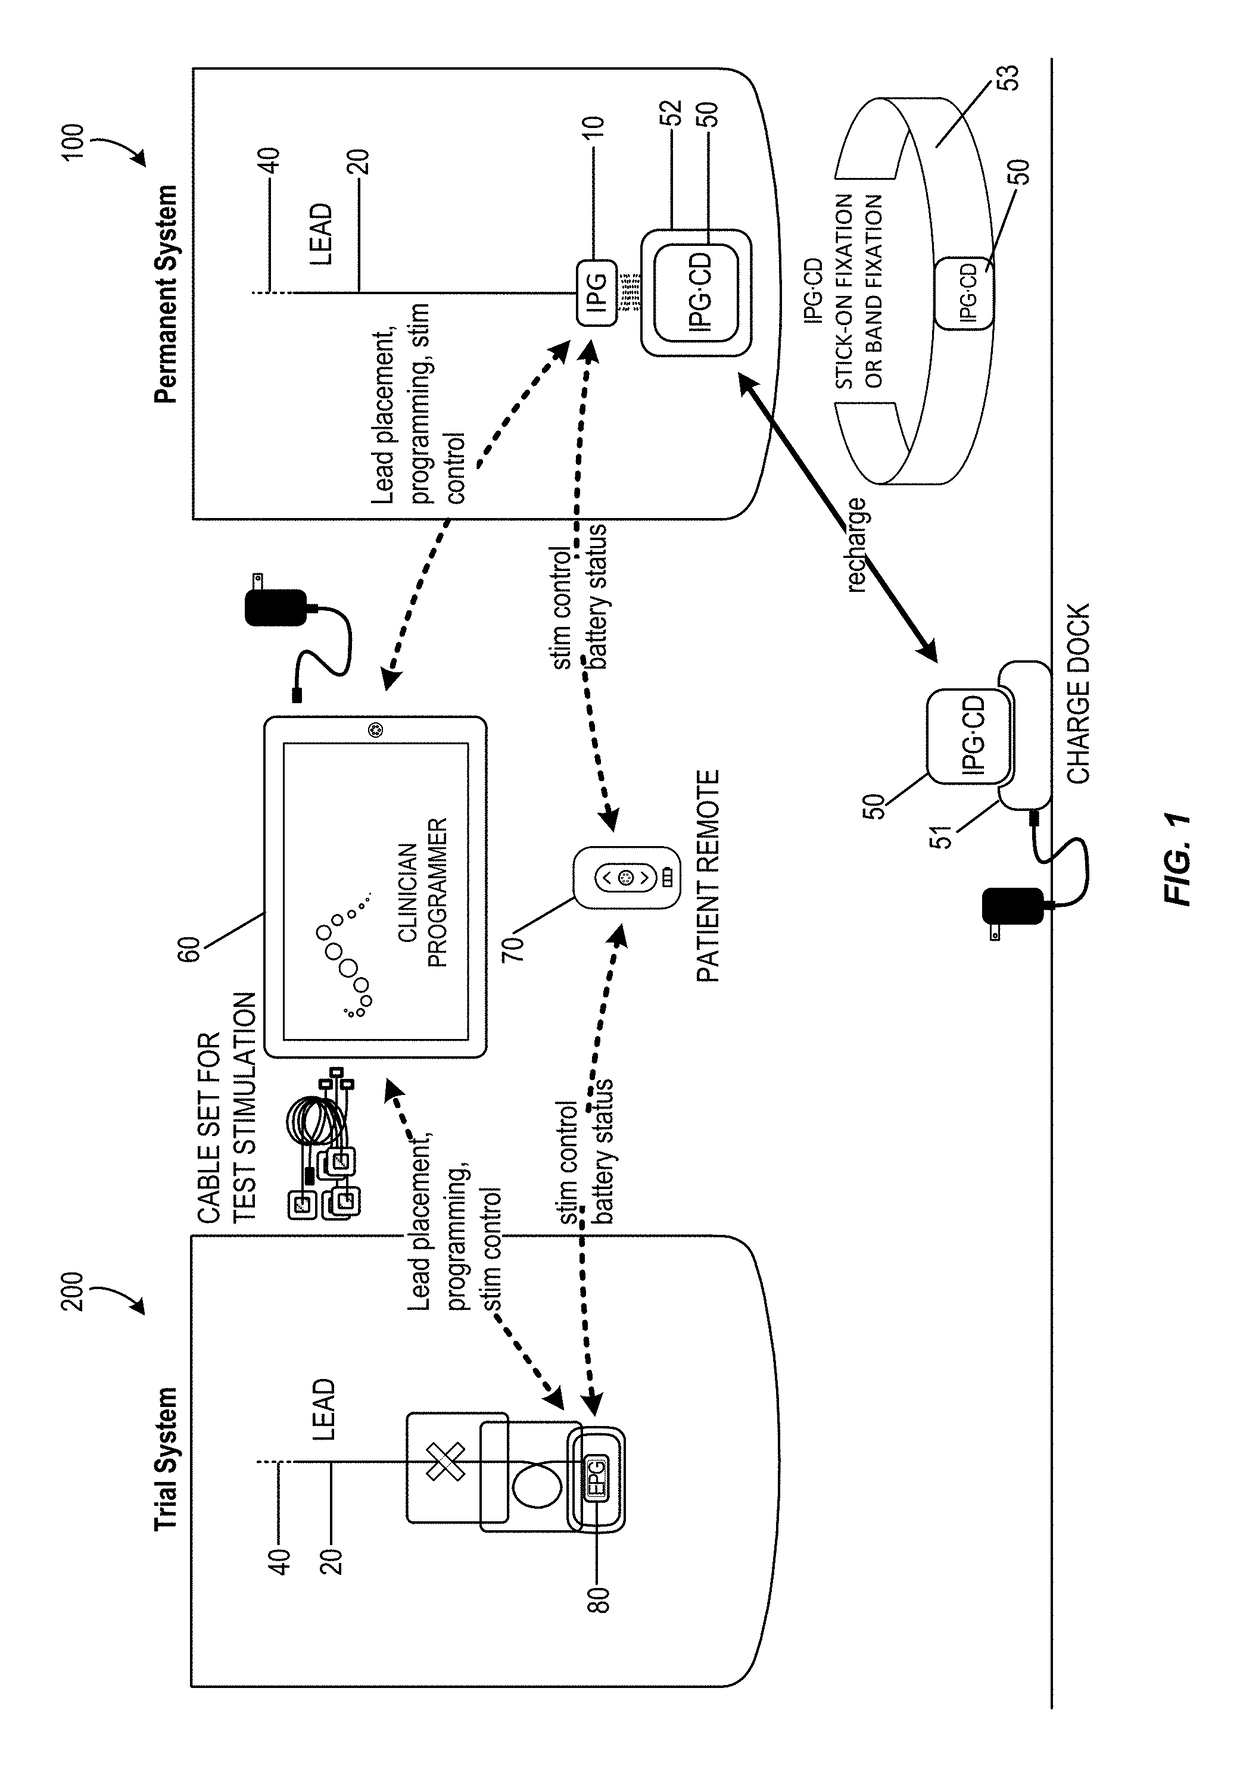 Integrated electromyographic clinician programmer for use with an implantable neurostimulator